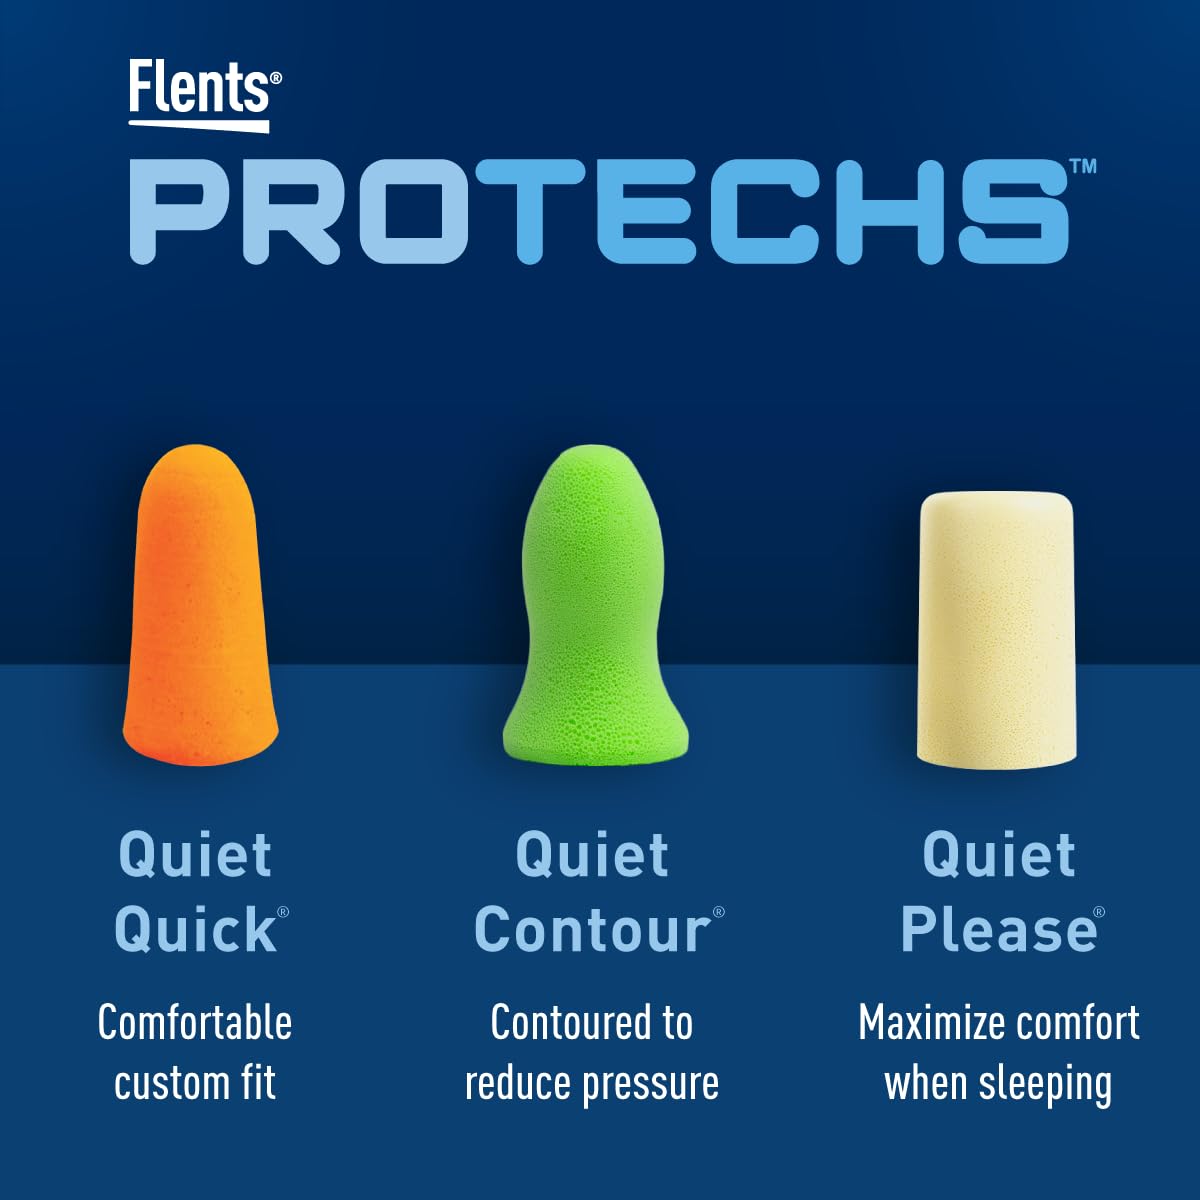 Flents Foam Ear Plugs, 10 Pair with Case for Sleeping, Snoring, Loud Noise, Traveling, Concerts, Construction, & Studying, NRR 33, Green, Made in the USA